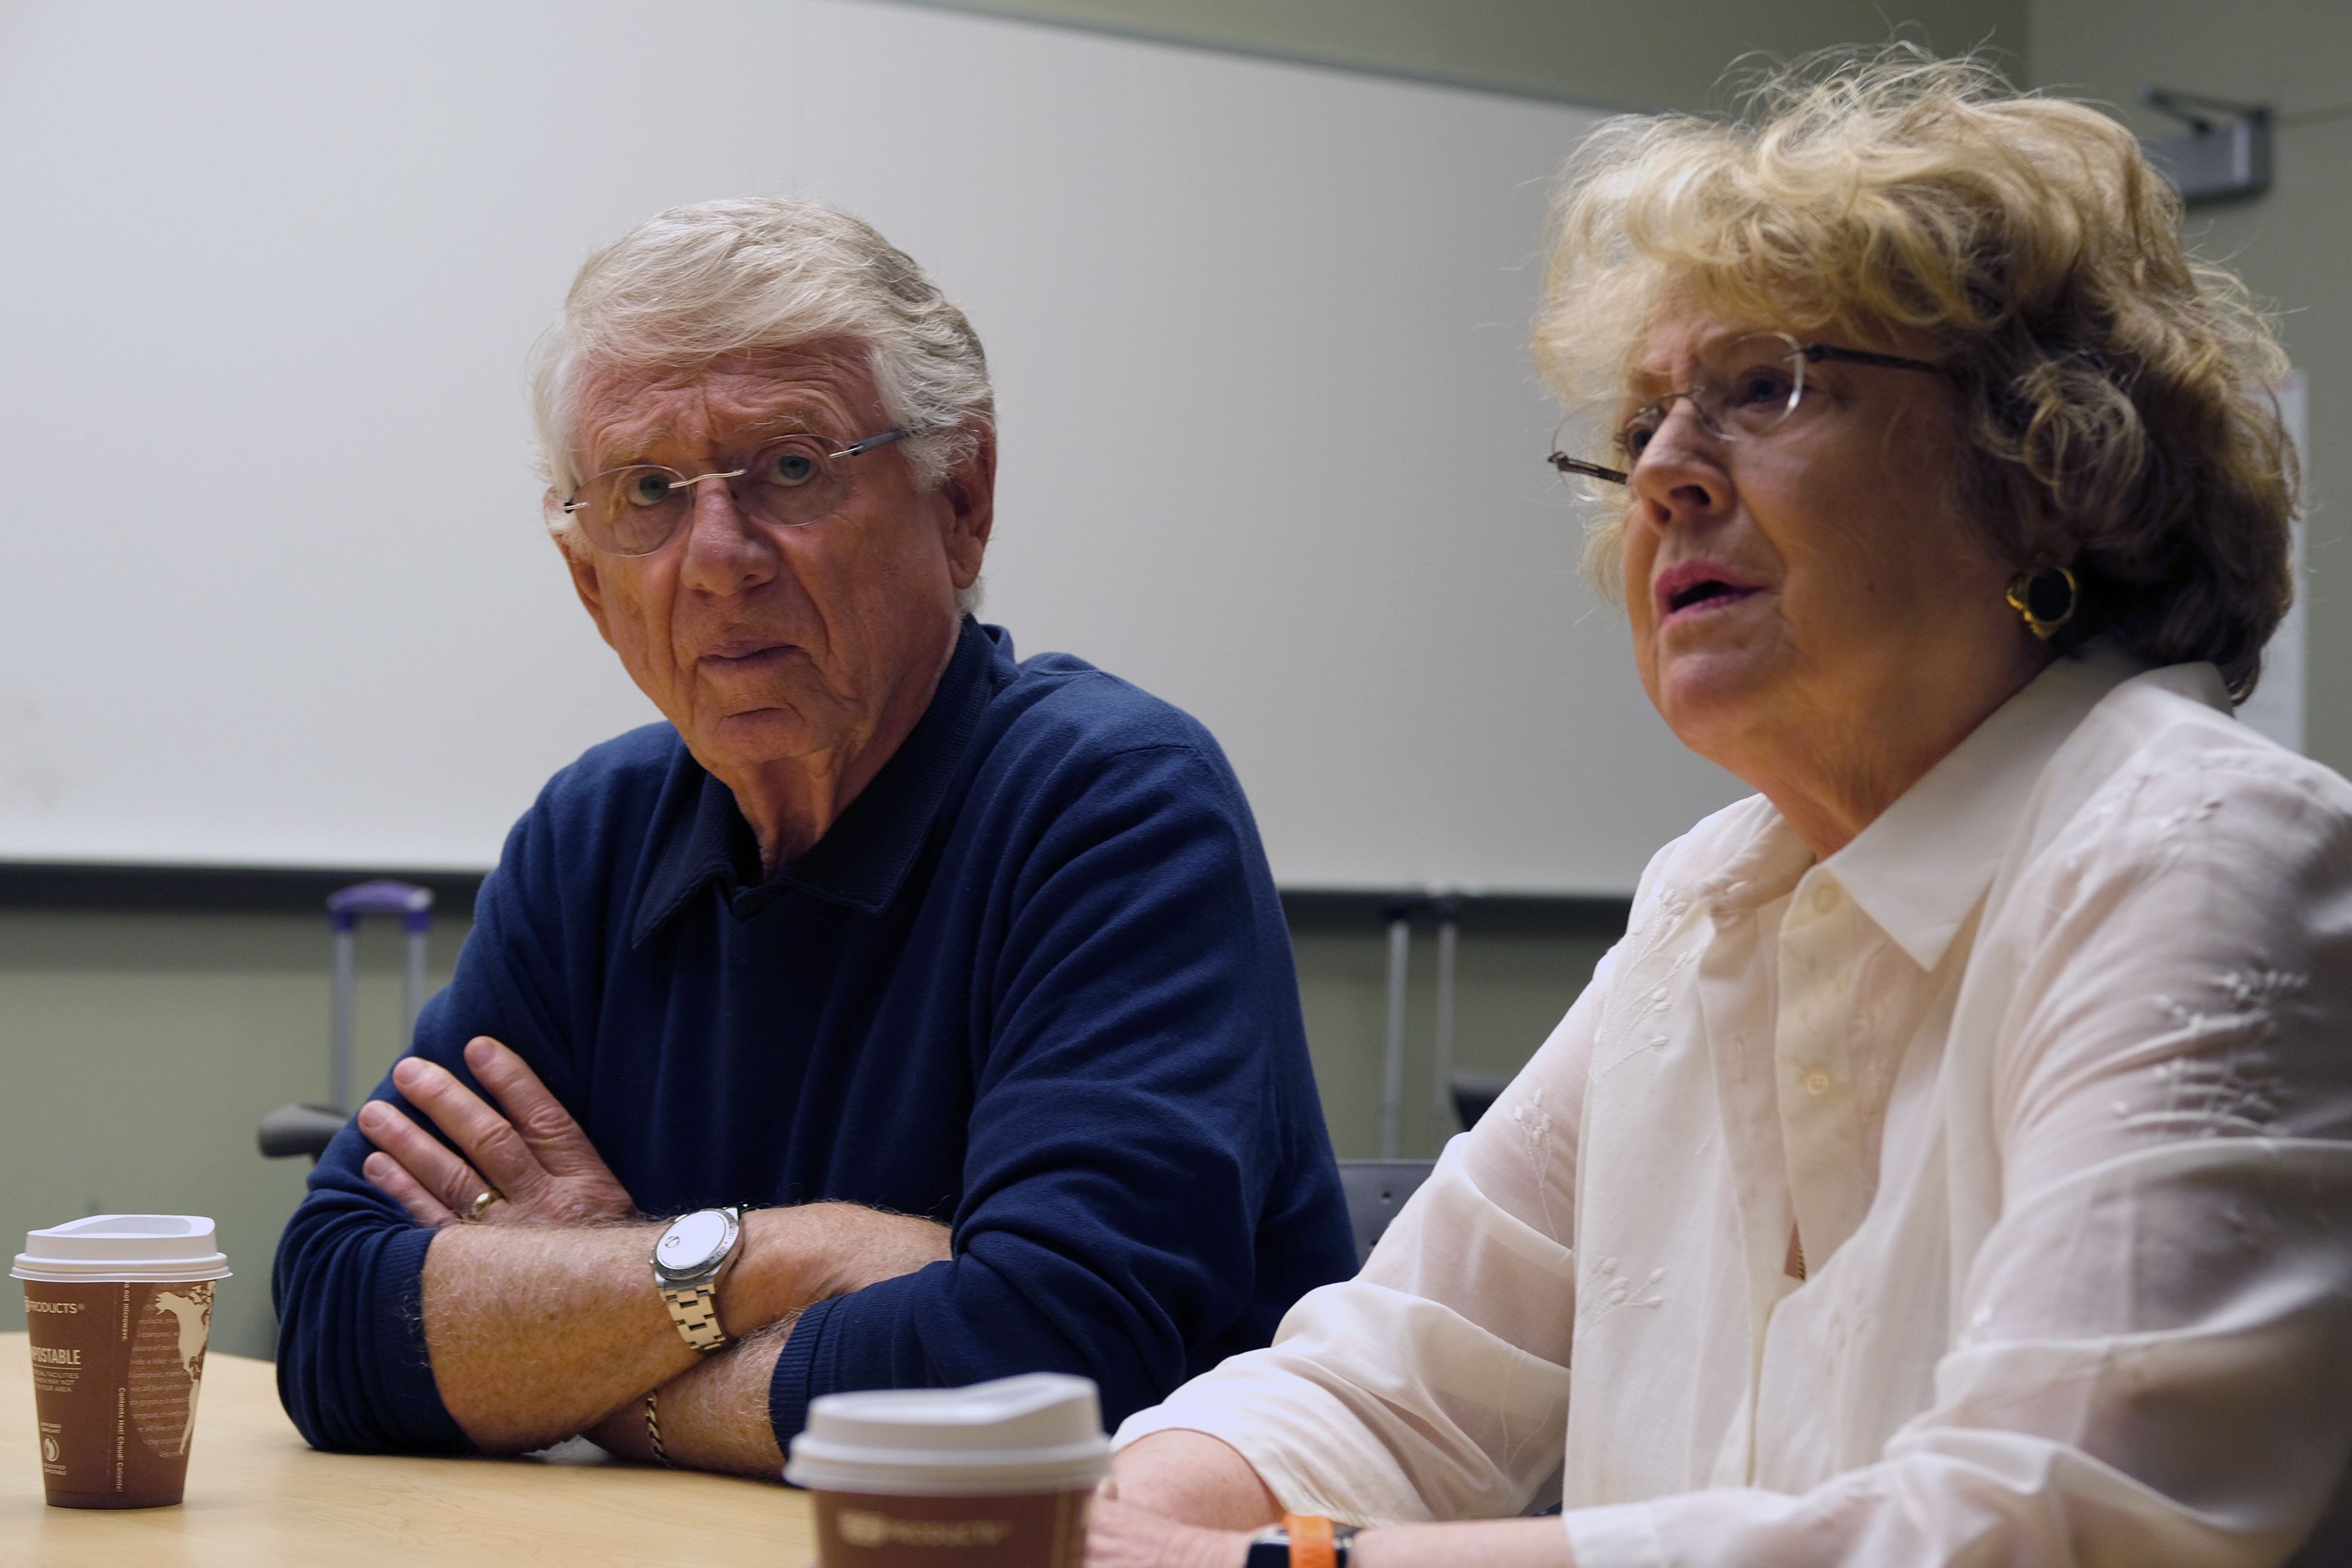 Ted Koppel and his wife have dedicated themselves to fighting COPD | CNN